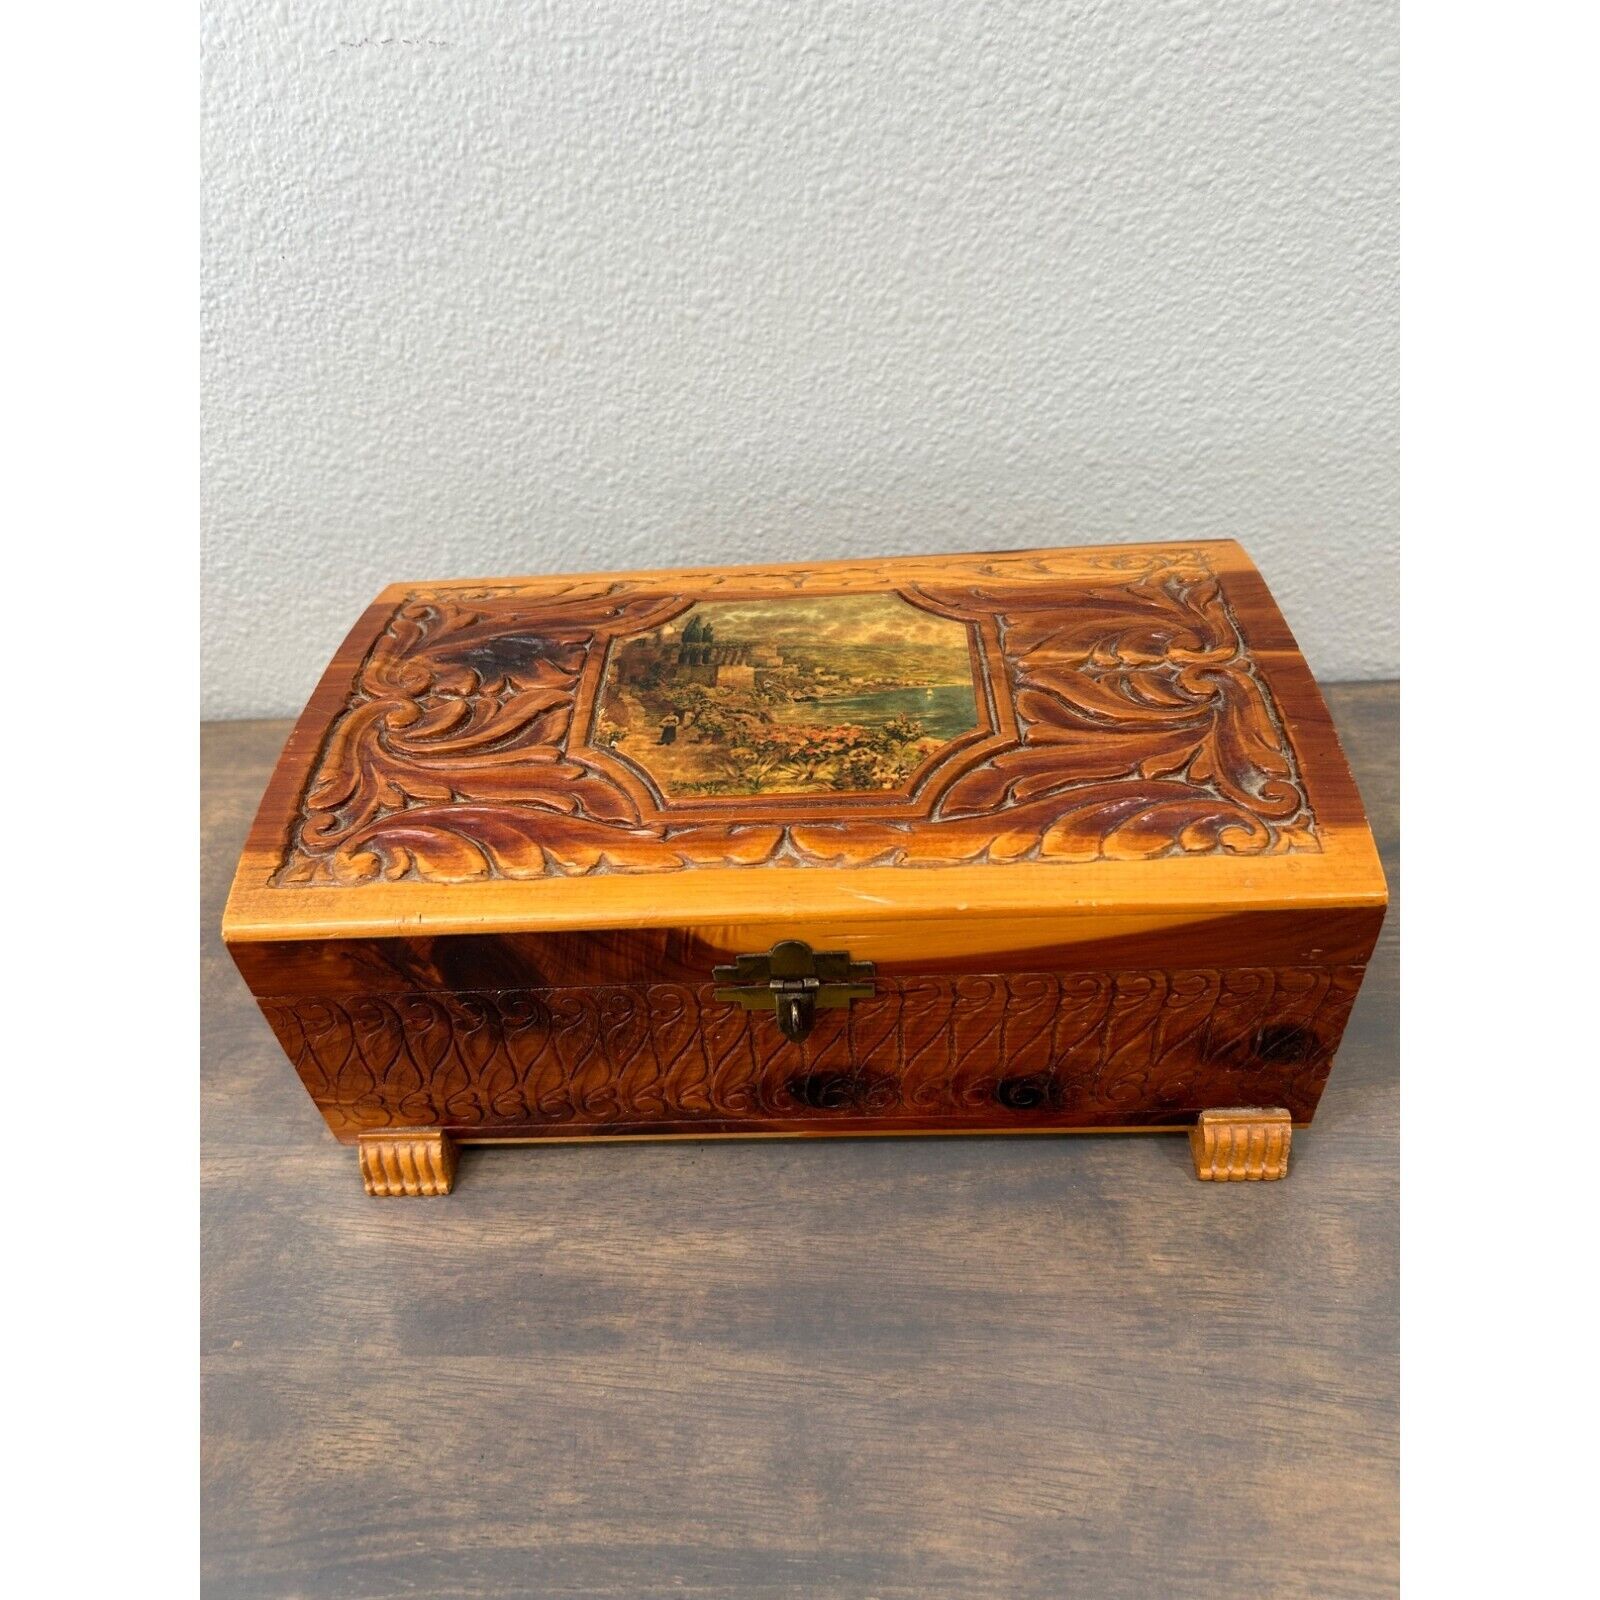 Vintage Hand Carved Cedar Wood Jewelry Box with Mirror and latch